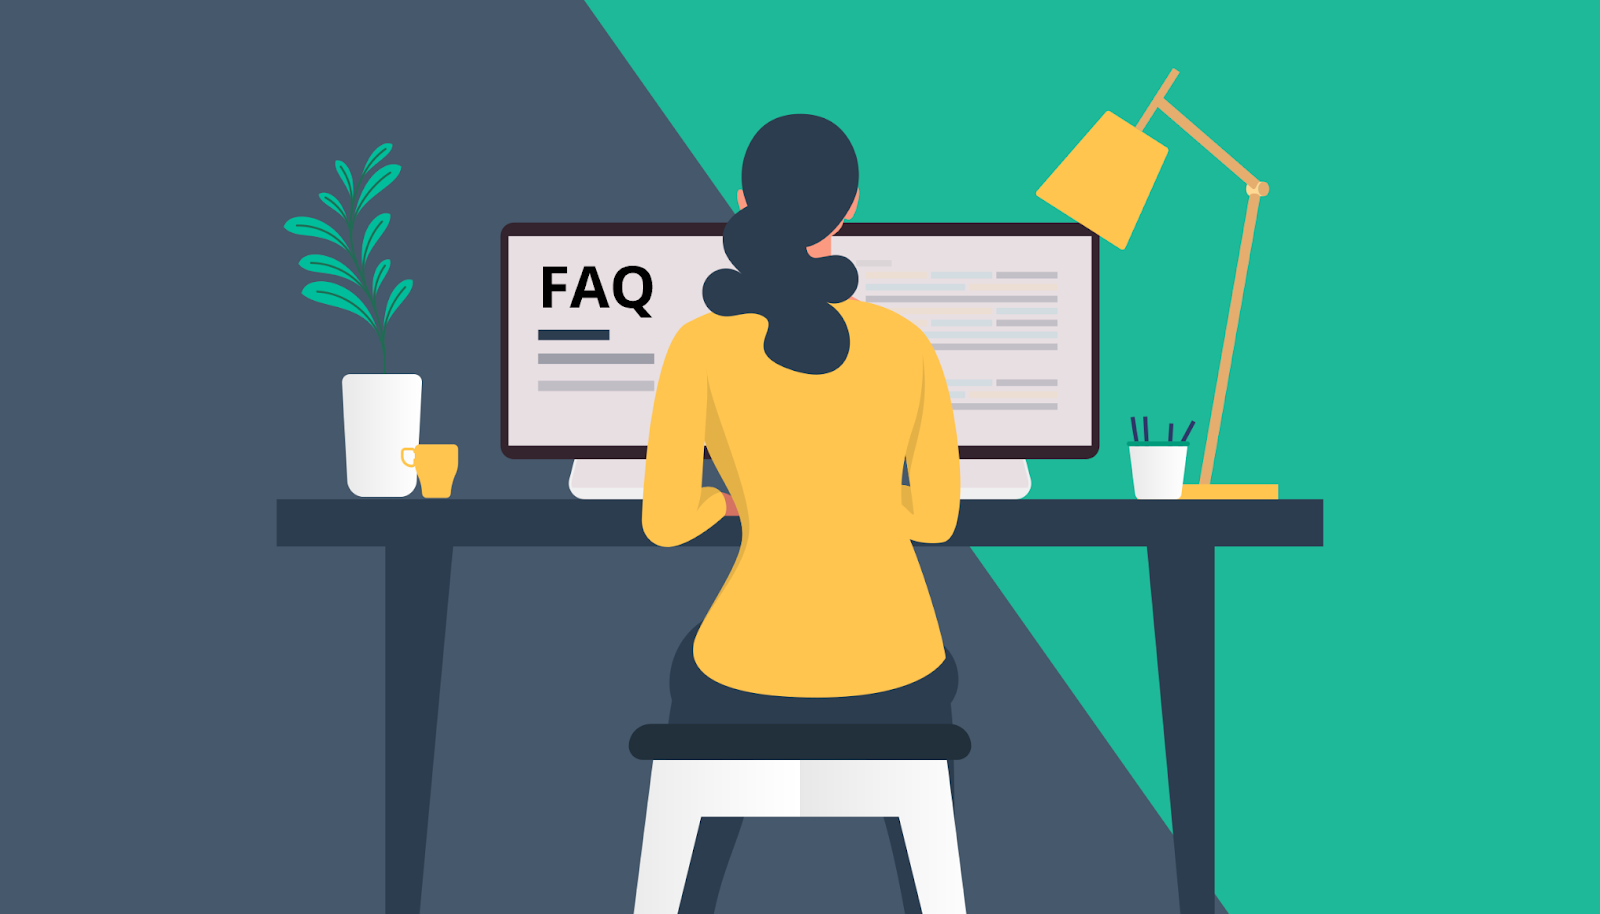 Illustration showing user on an FAQ page